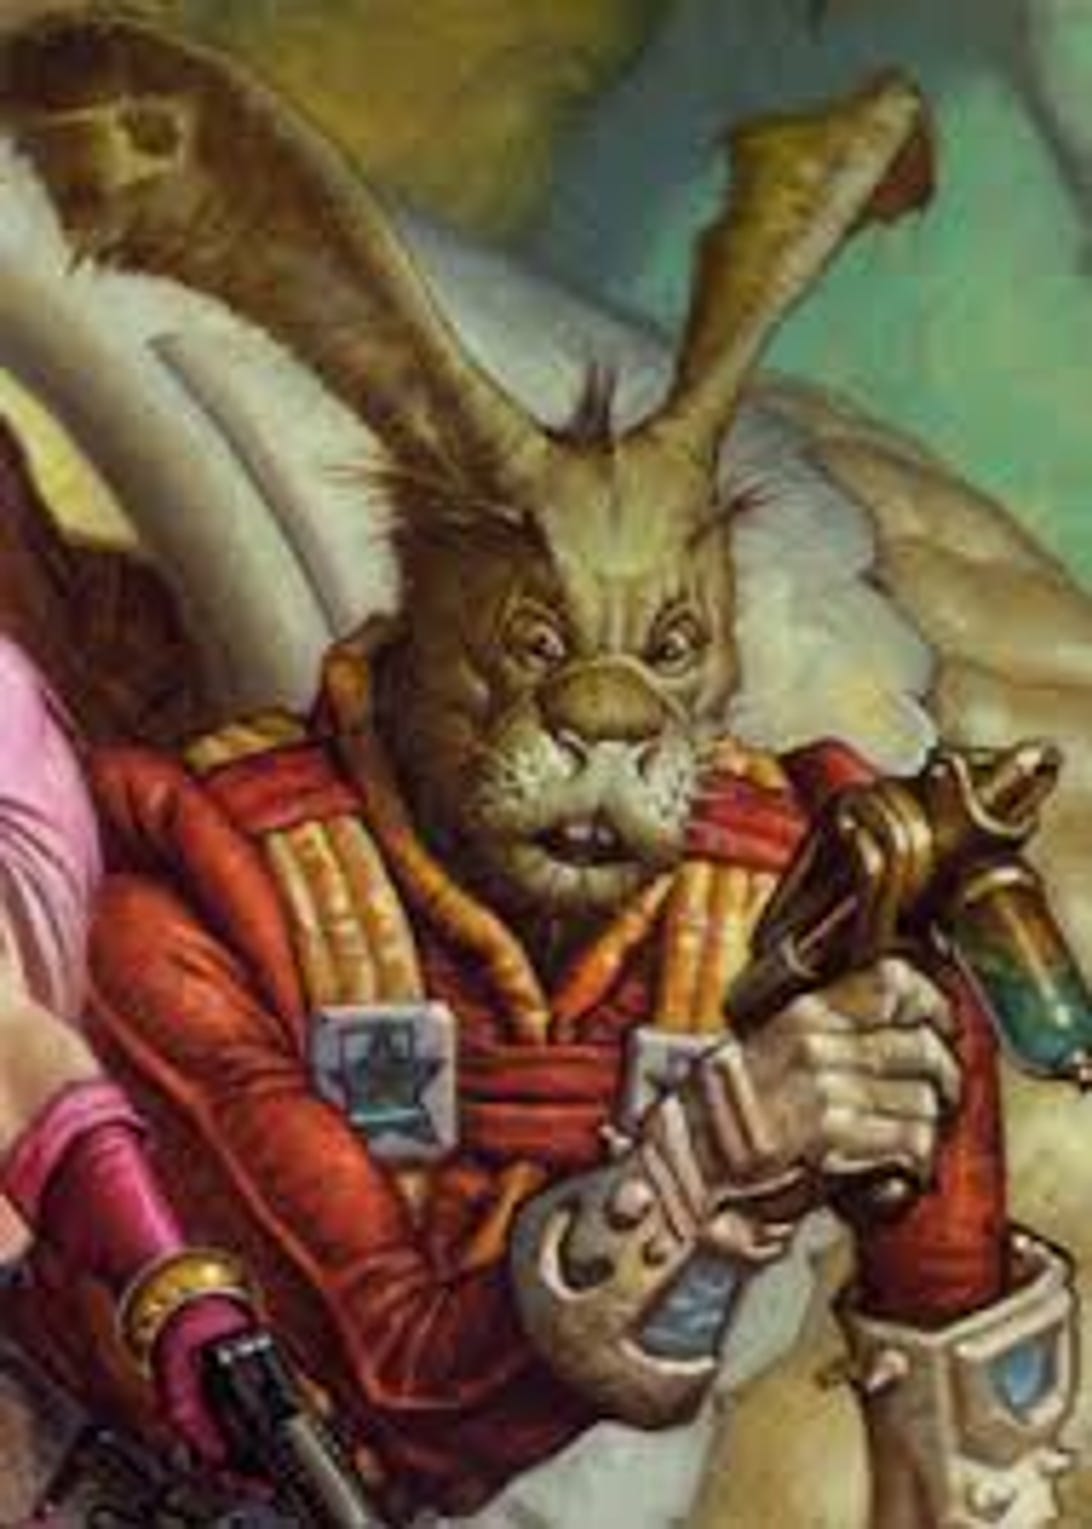 Jaxxon may look like a goofy green rabbit, but he's a clever Lepi smuggler from Coachelle Prime in the "Star Wars" comics.